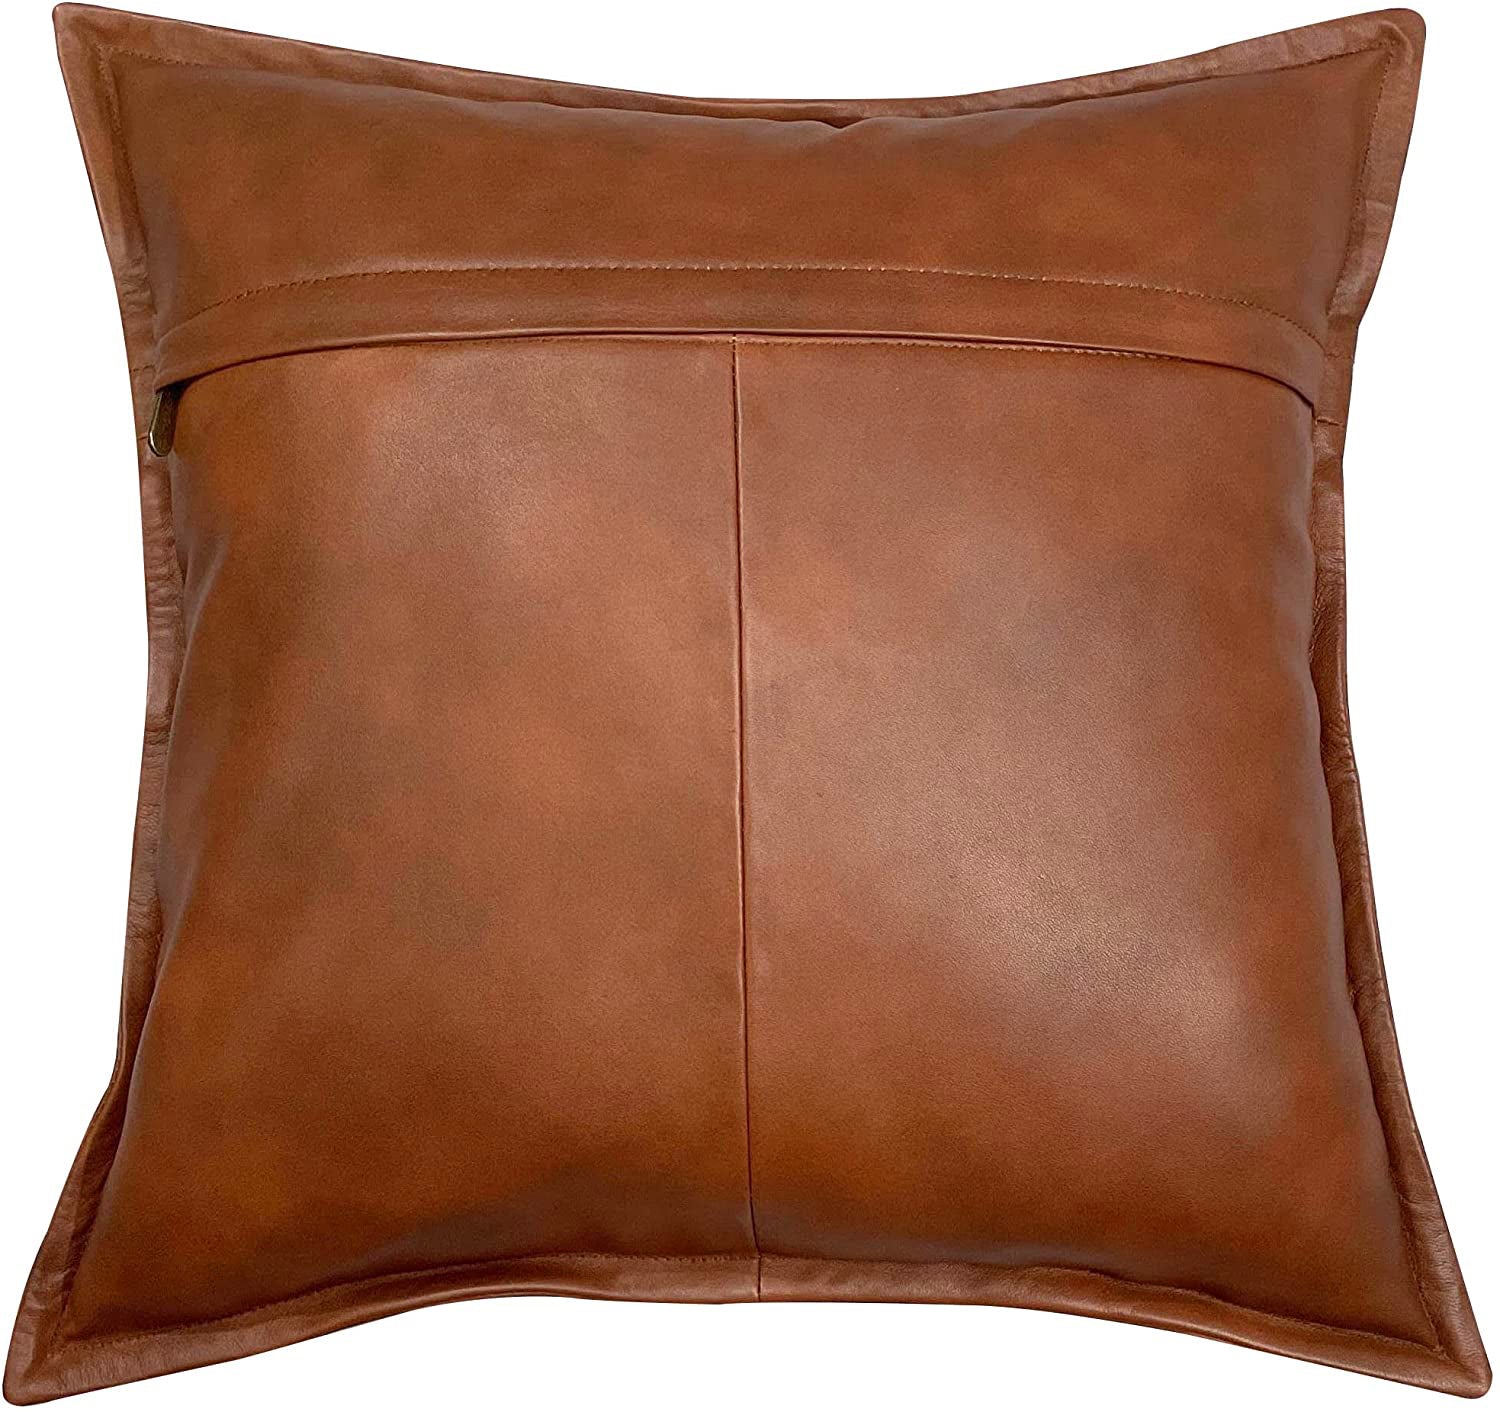 Genuine Leather Square Pillow Cover 19 SkinOutfit